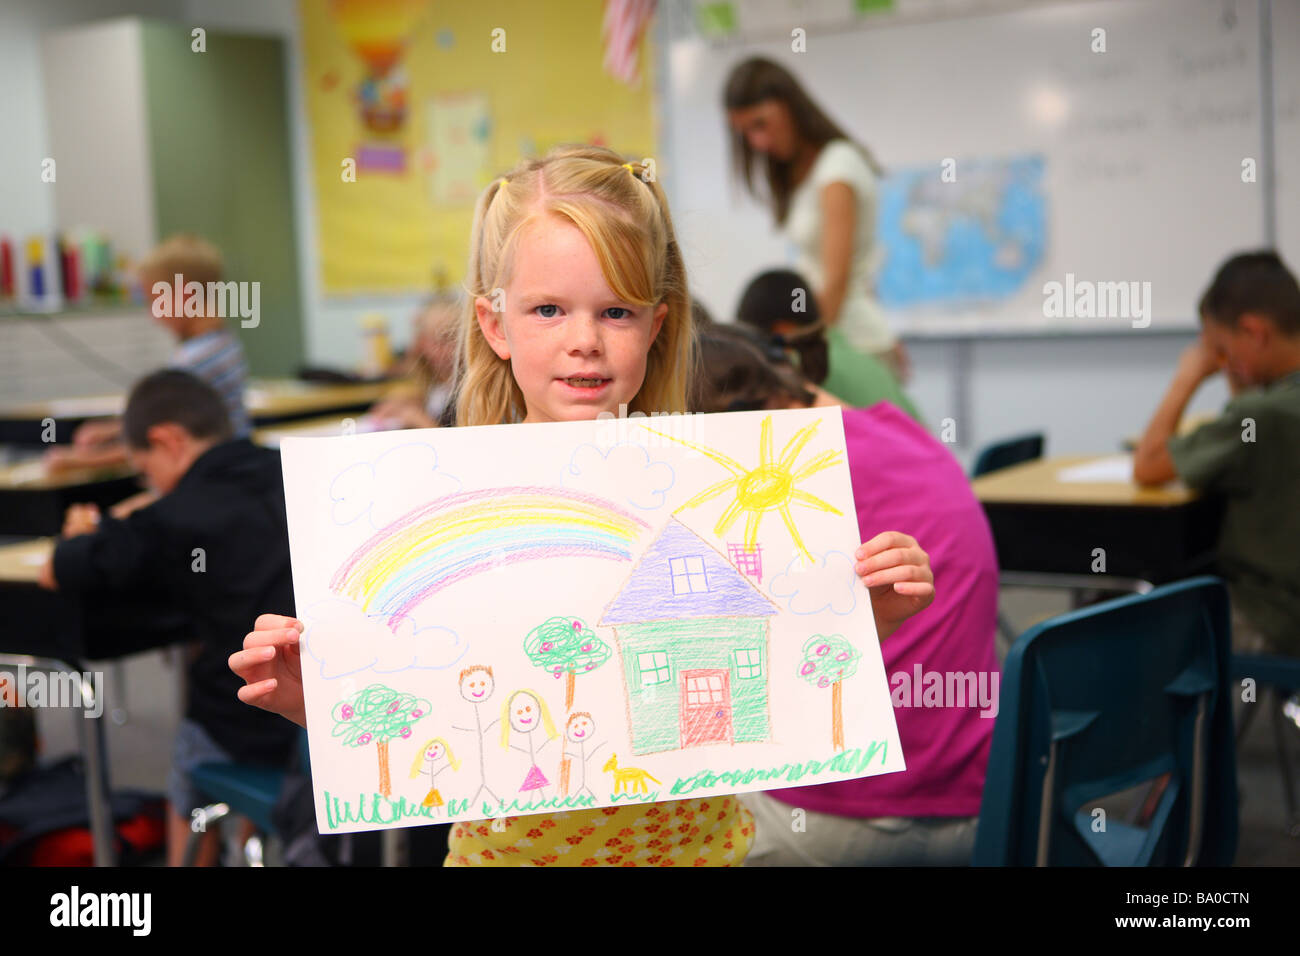 School girl holding up drawing Stock Photo